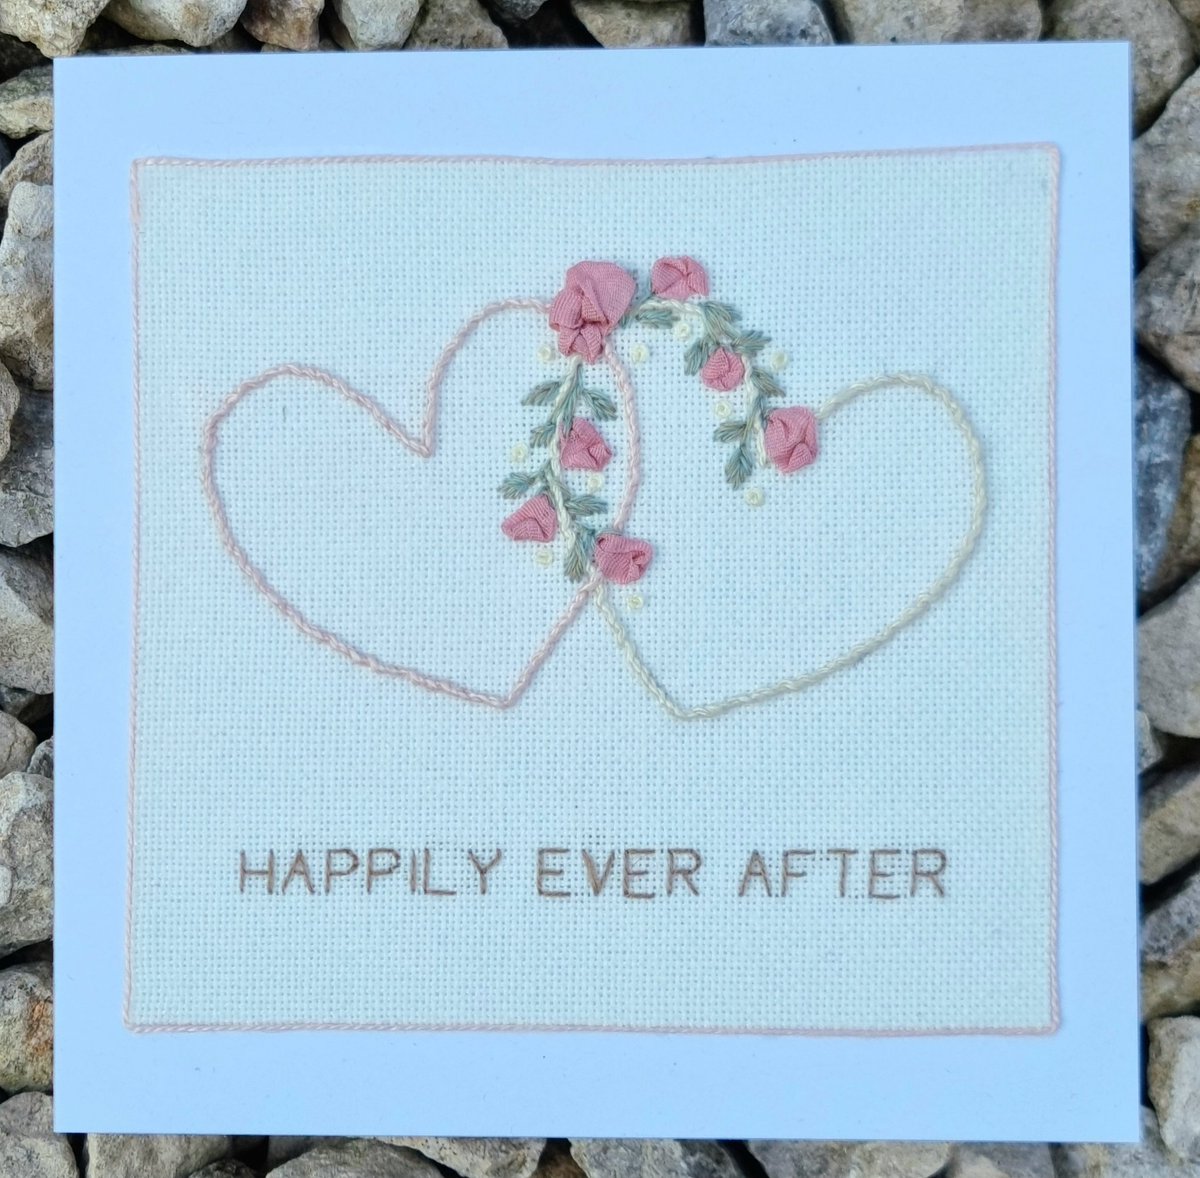 Prices for my #handmade cards start at 2.60. I also have a couple of framed pieces or can frame others too. DM for details #handembroidery #crafts #weddingday